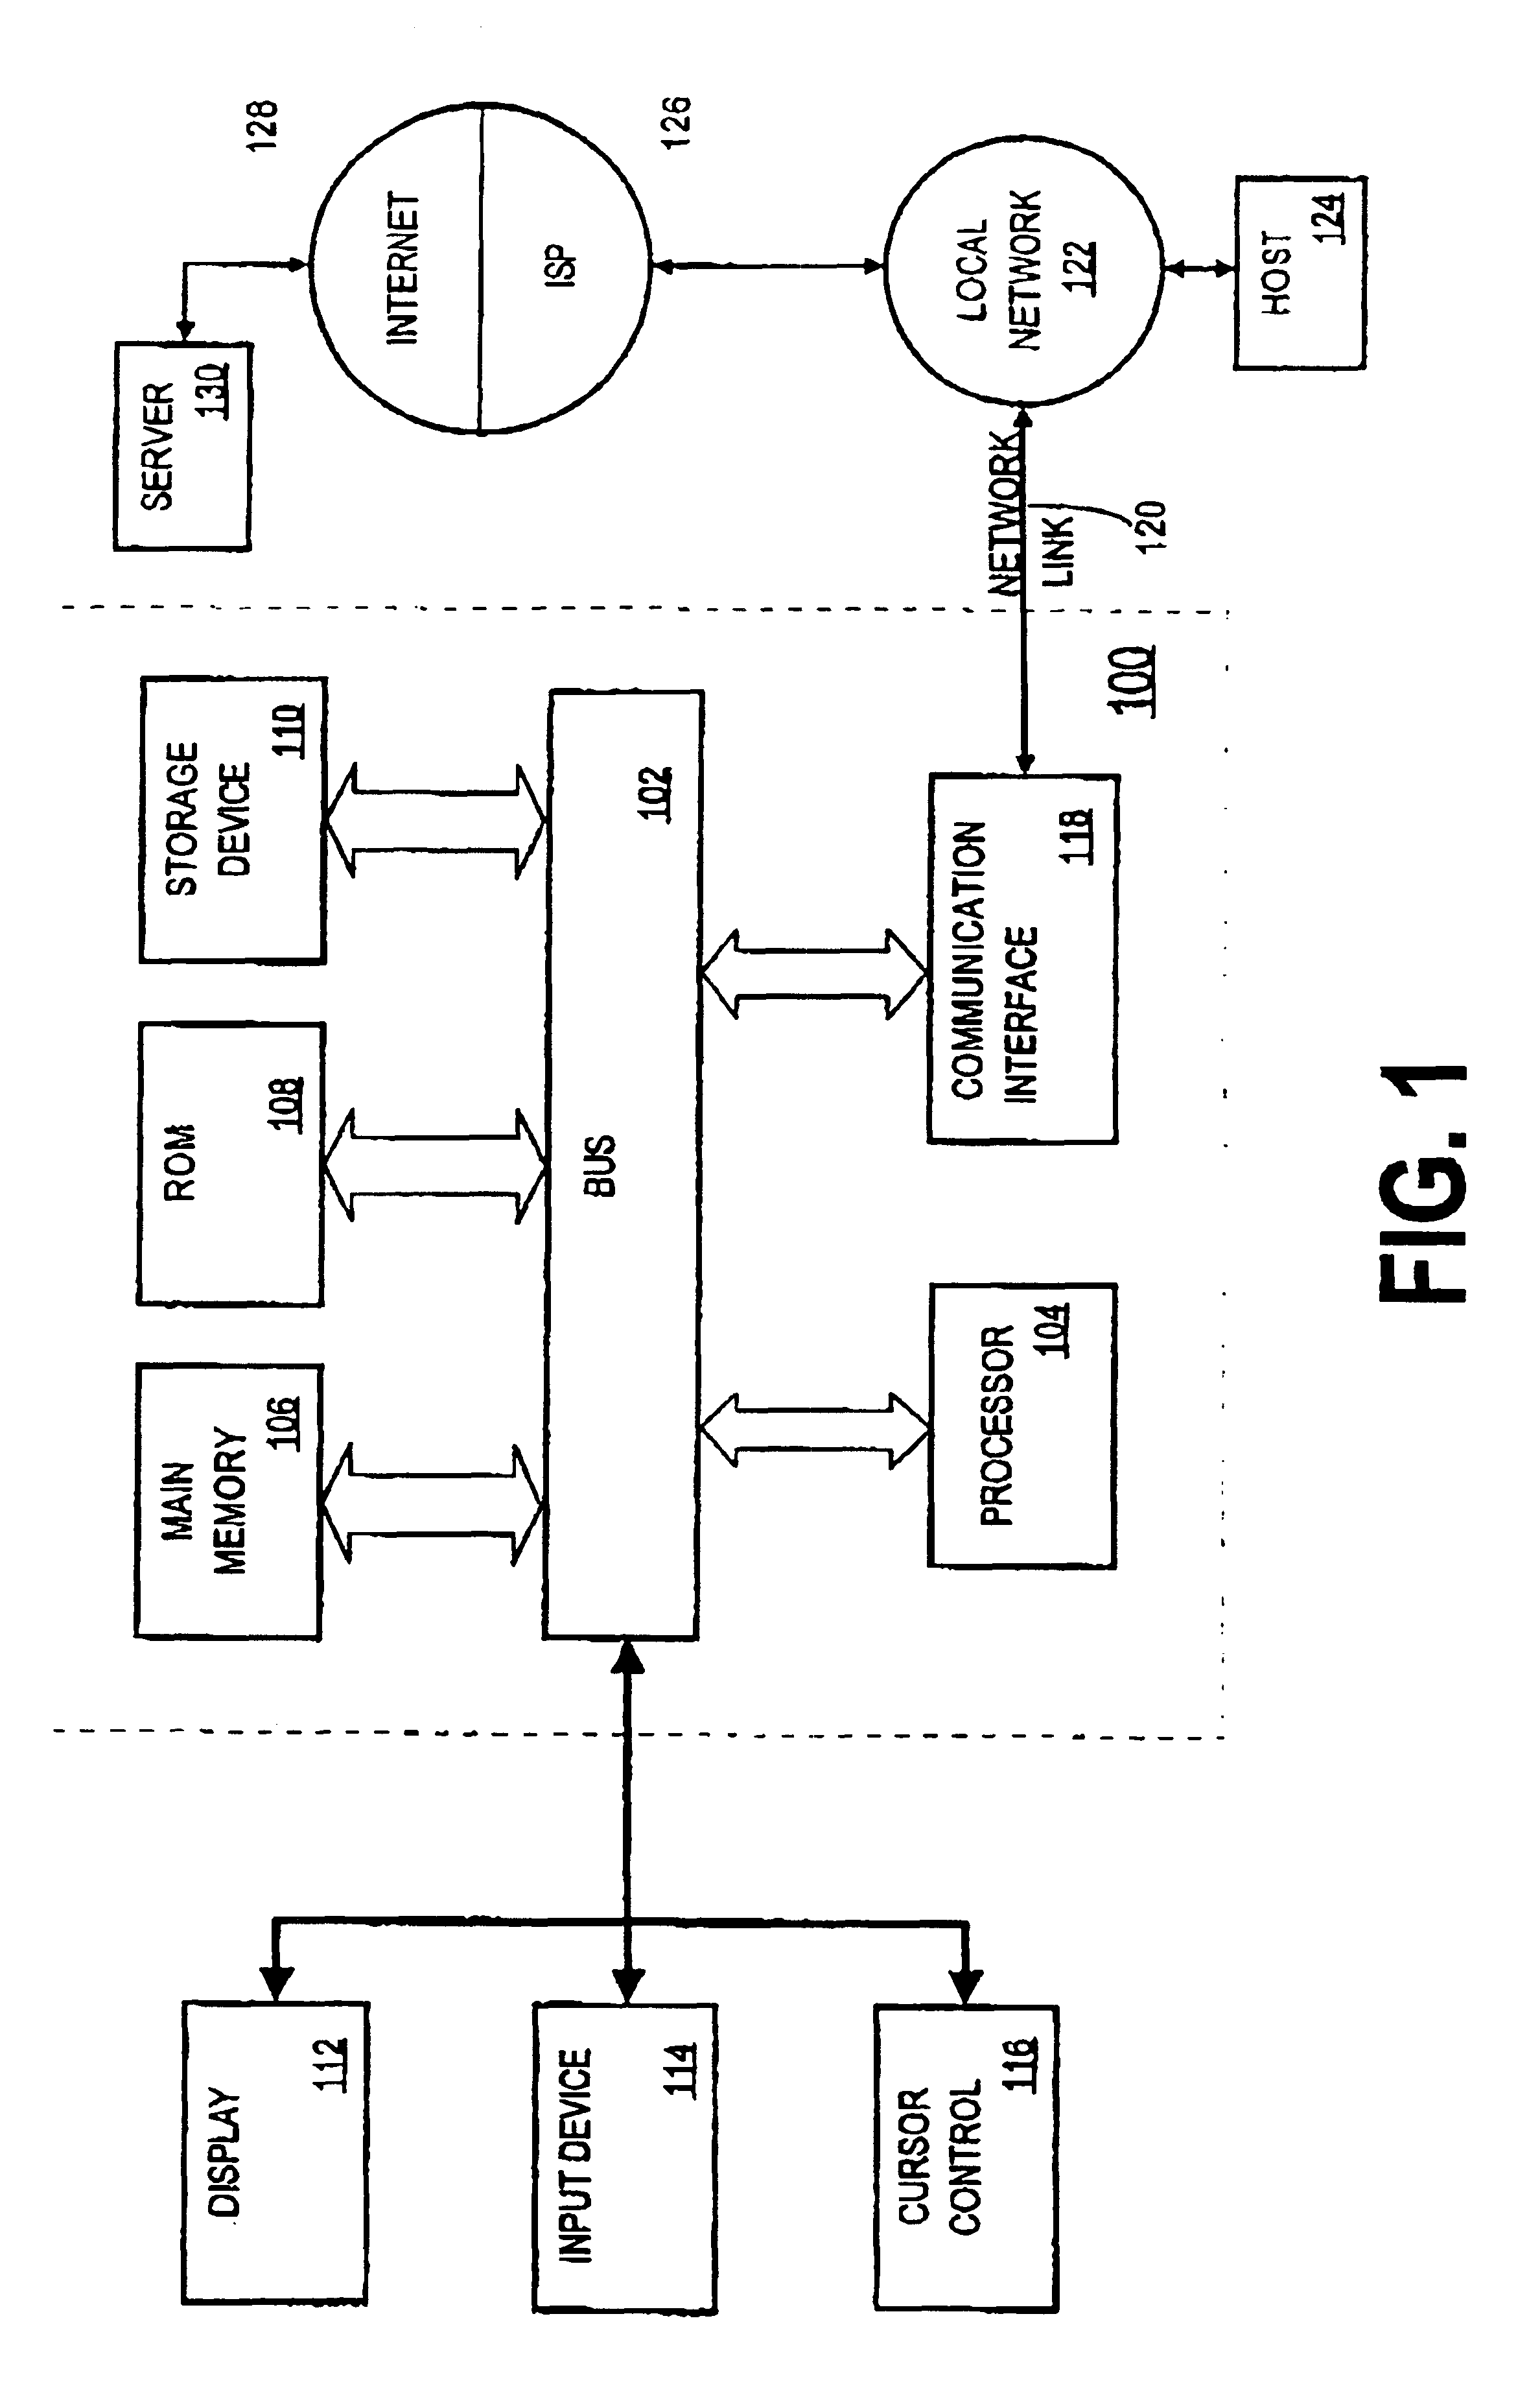 System and method for automatic retrieval of structured online documents